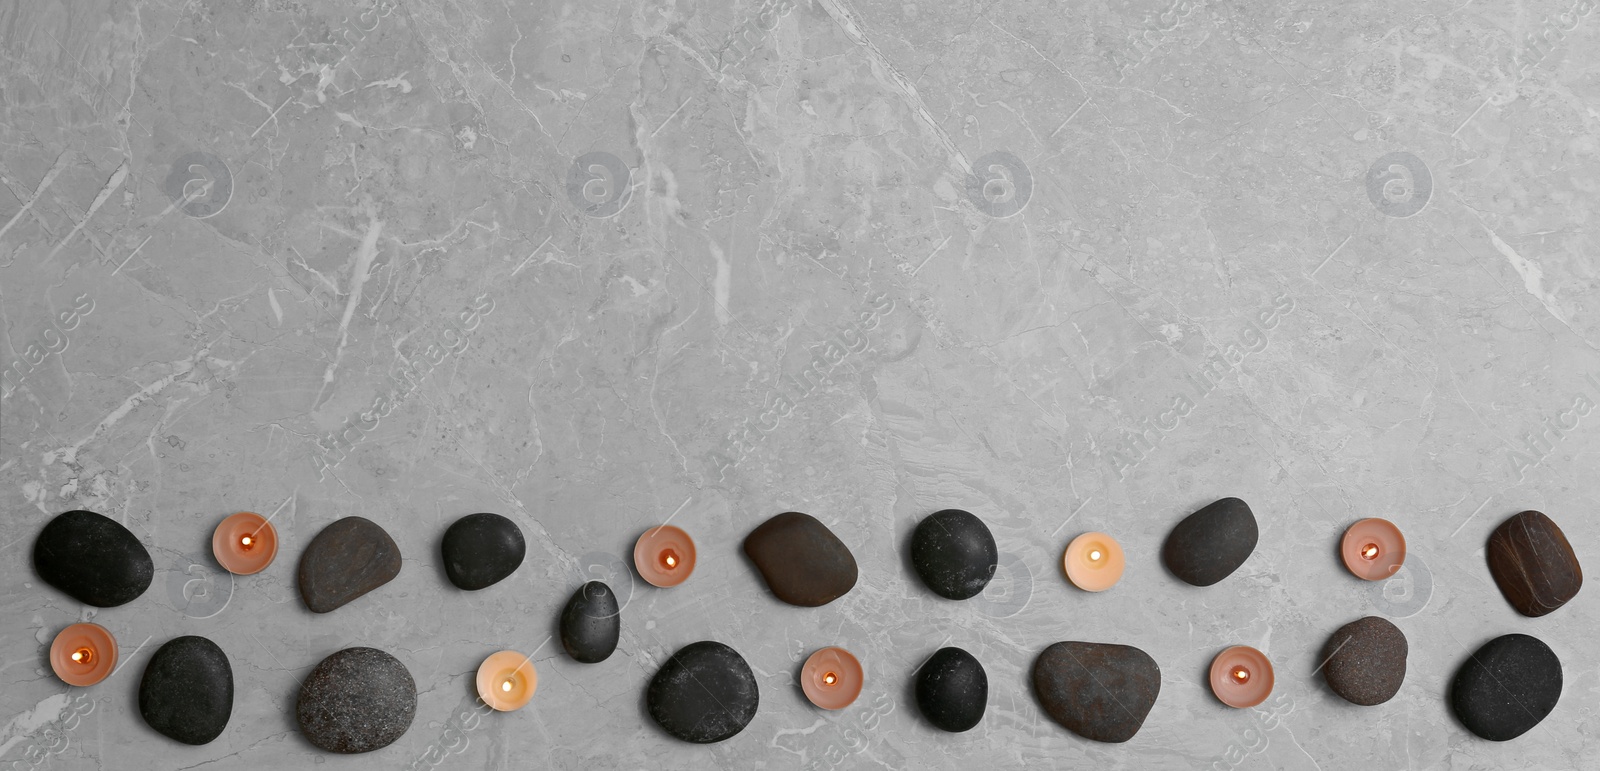 Photo of Flat lay composition with spa stones and lit candles on grey marble background, space for text